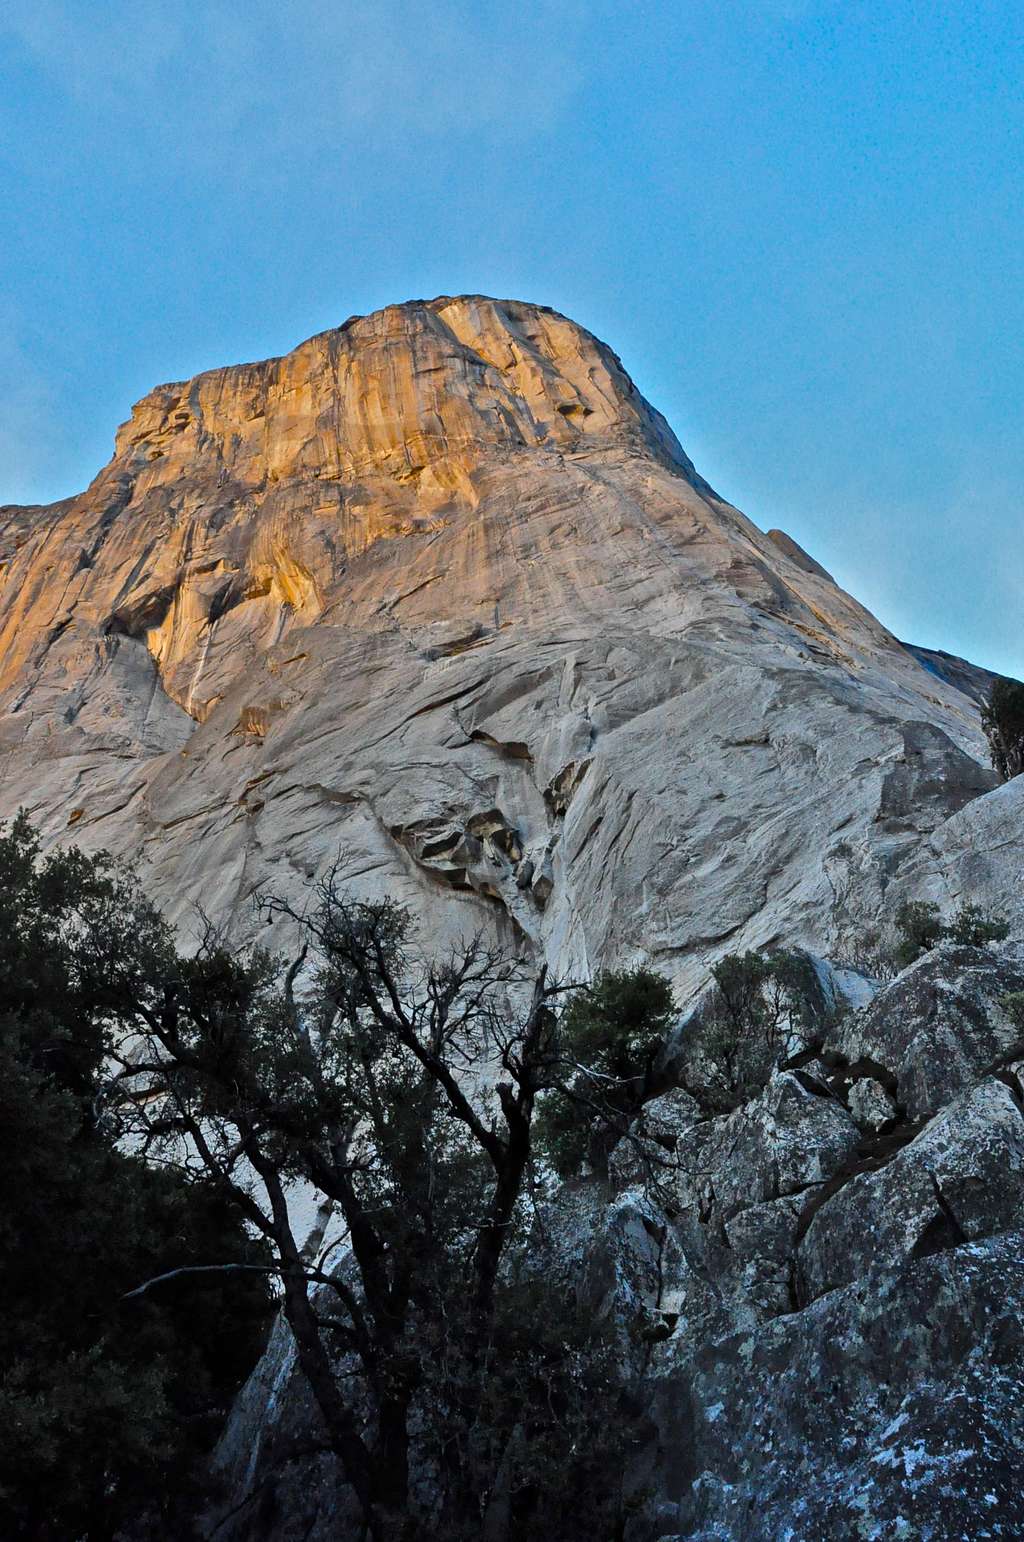 El Cap seen from the base of The Nose